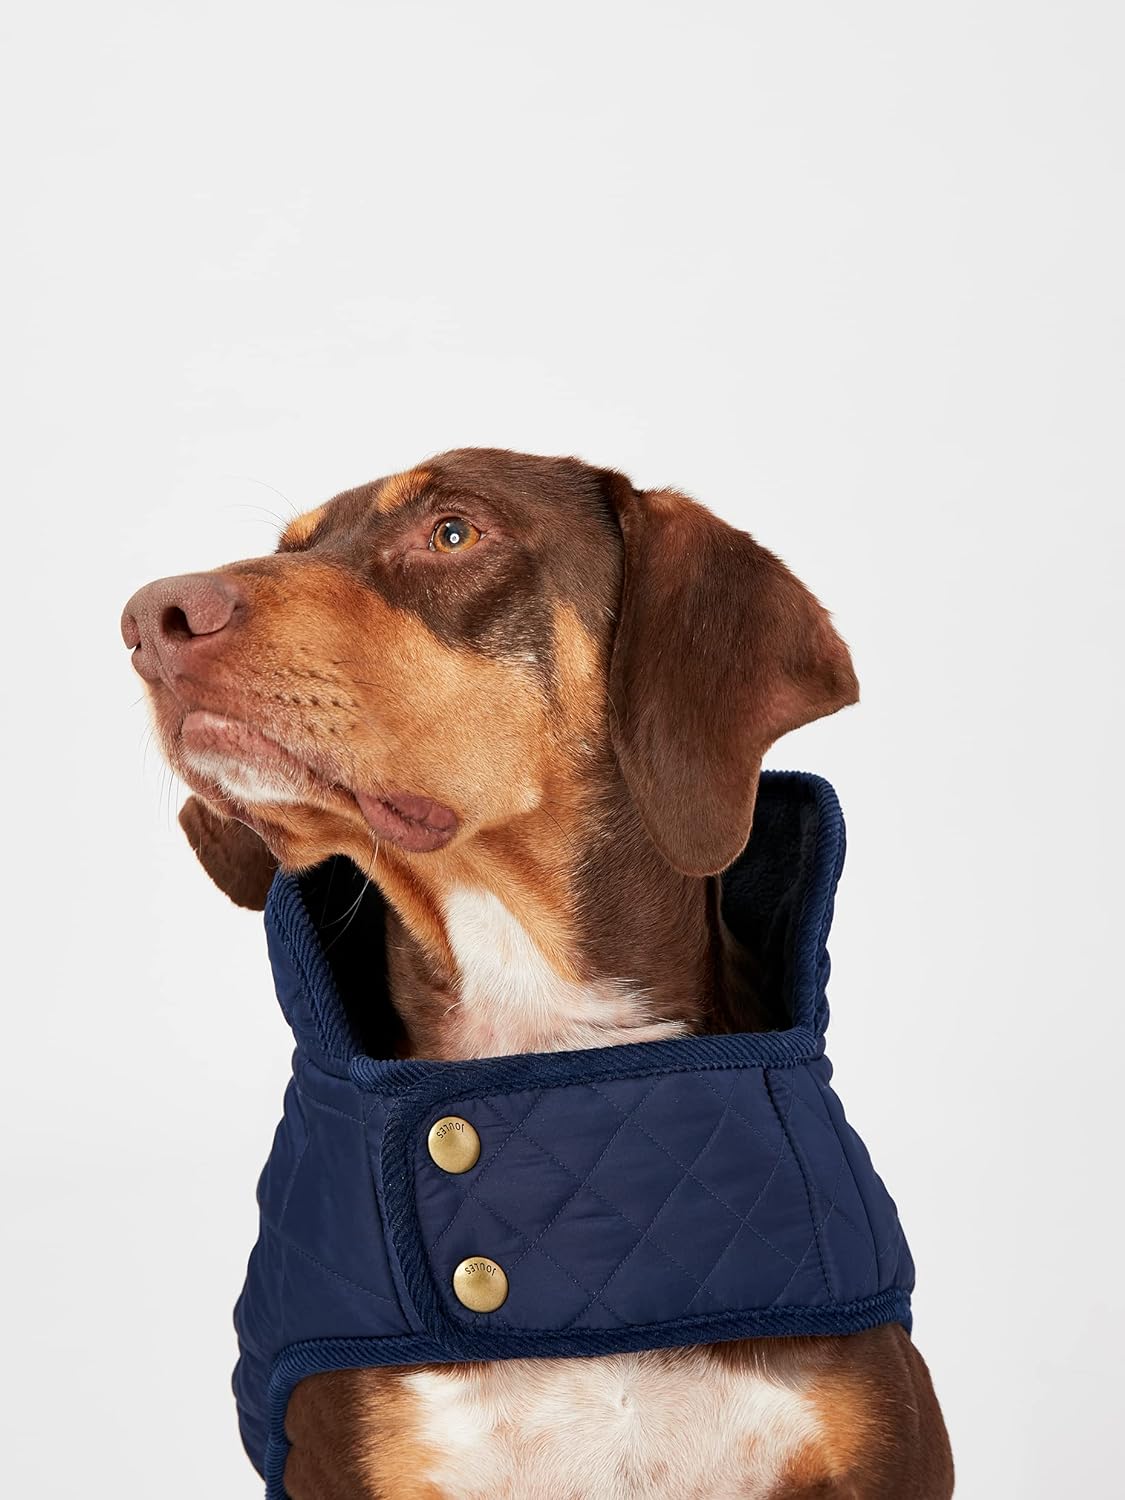 Joules Navy Blue Quilted Dog Coat